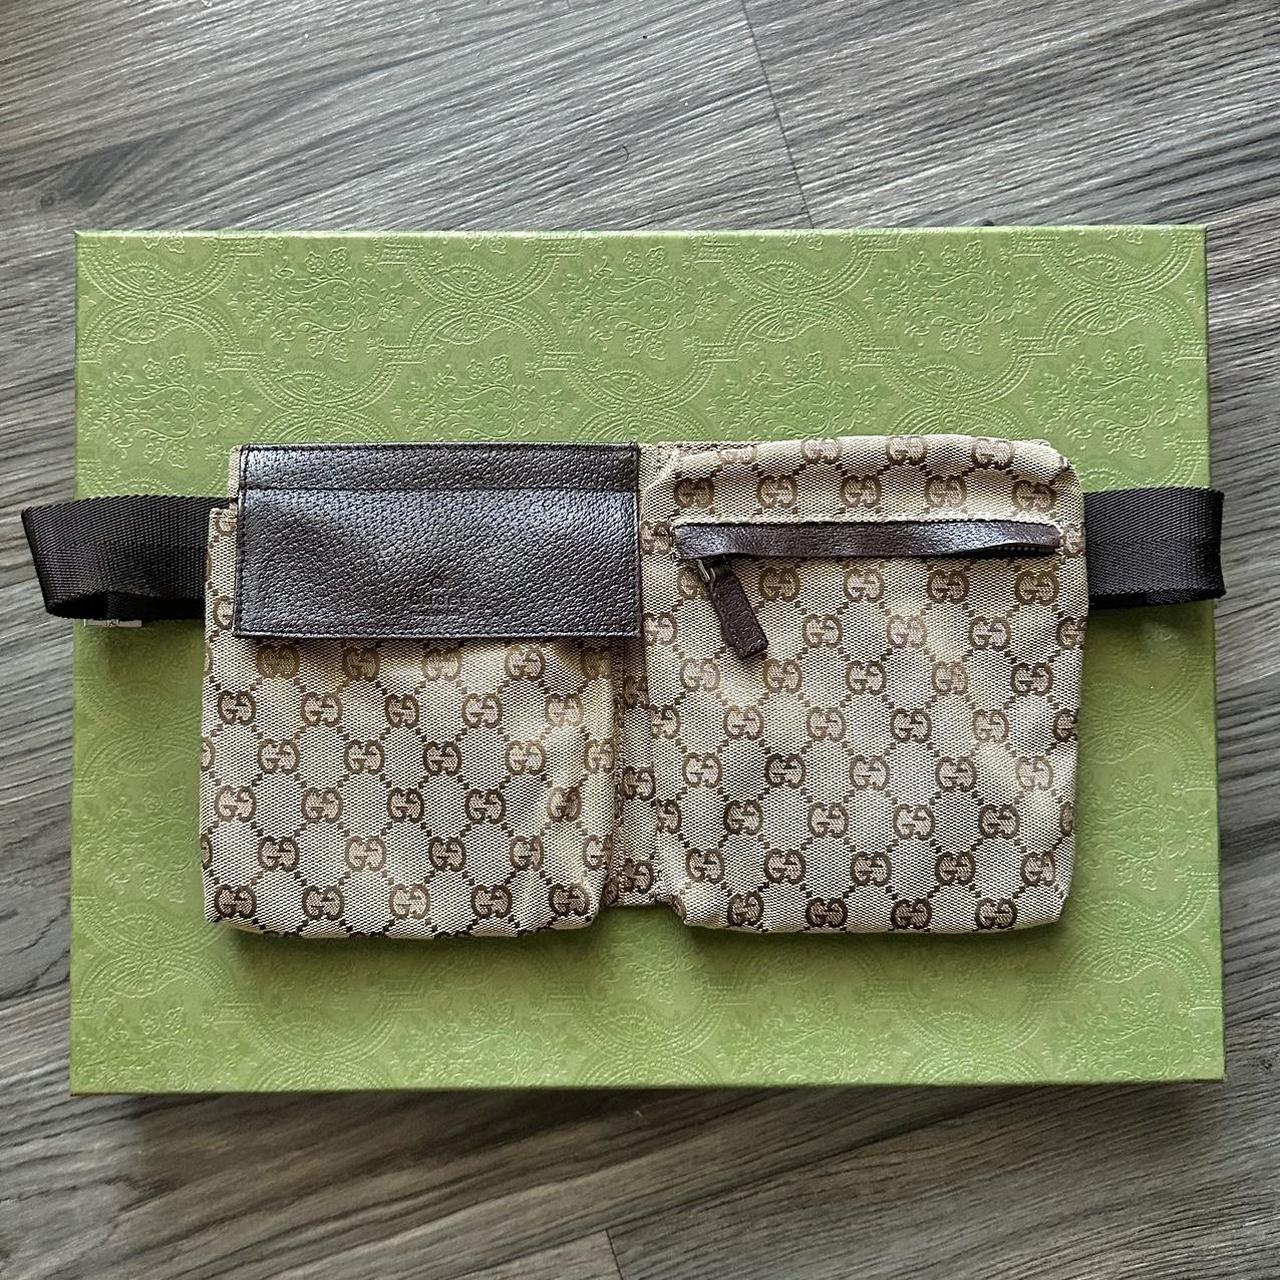 VINTAGE GUCCI FANNY PACK LIKE BAG from mom's closet - Depop